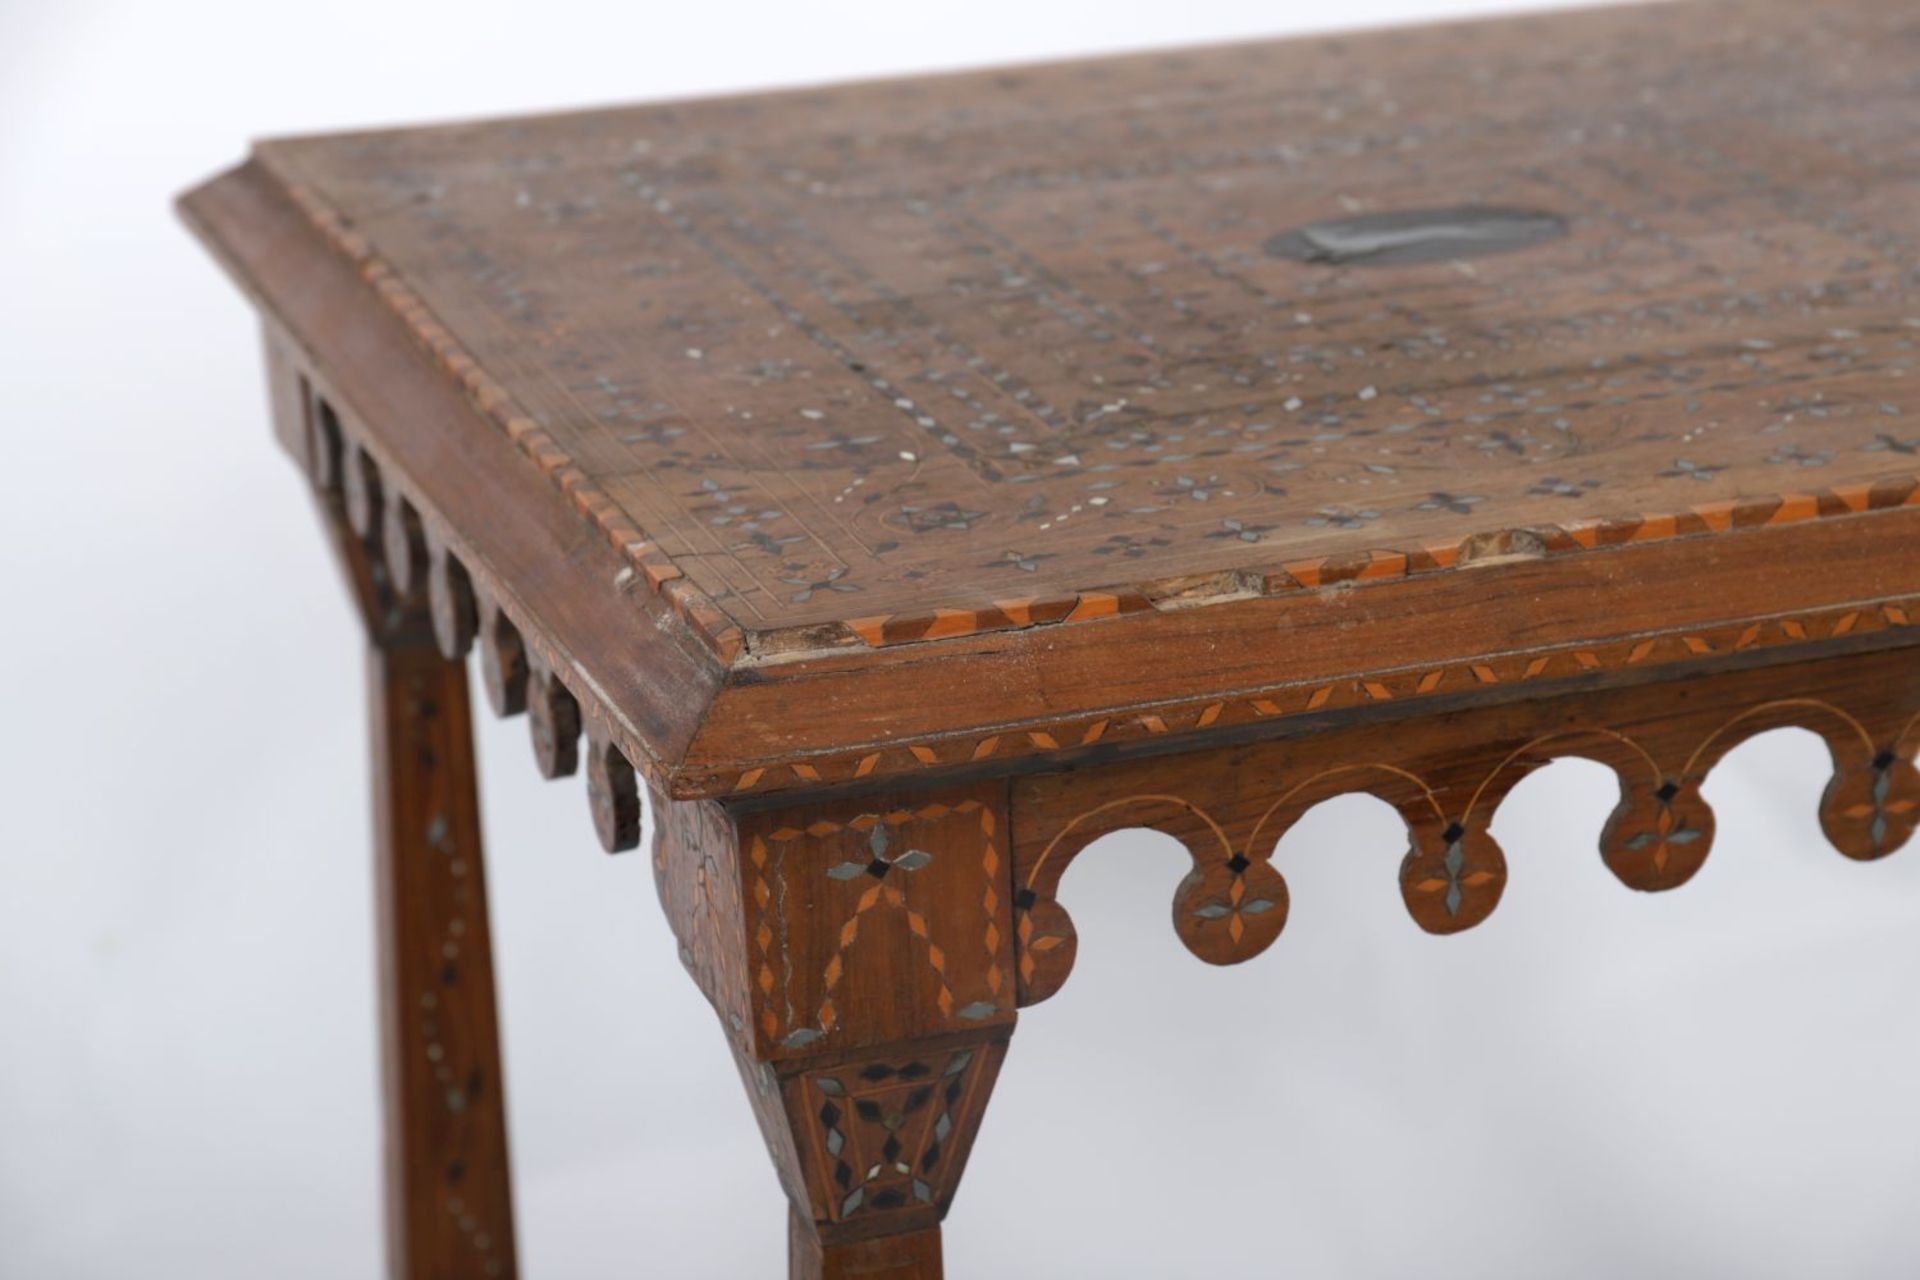 19TH-CENTURY OTTOMAN MARQUETRY CENTRE TABLE - Image 2 of 4